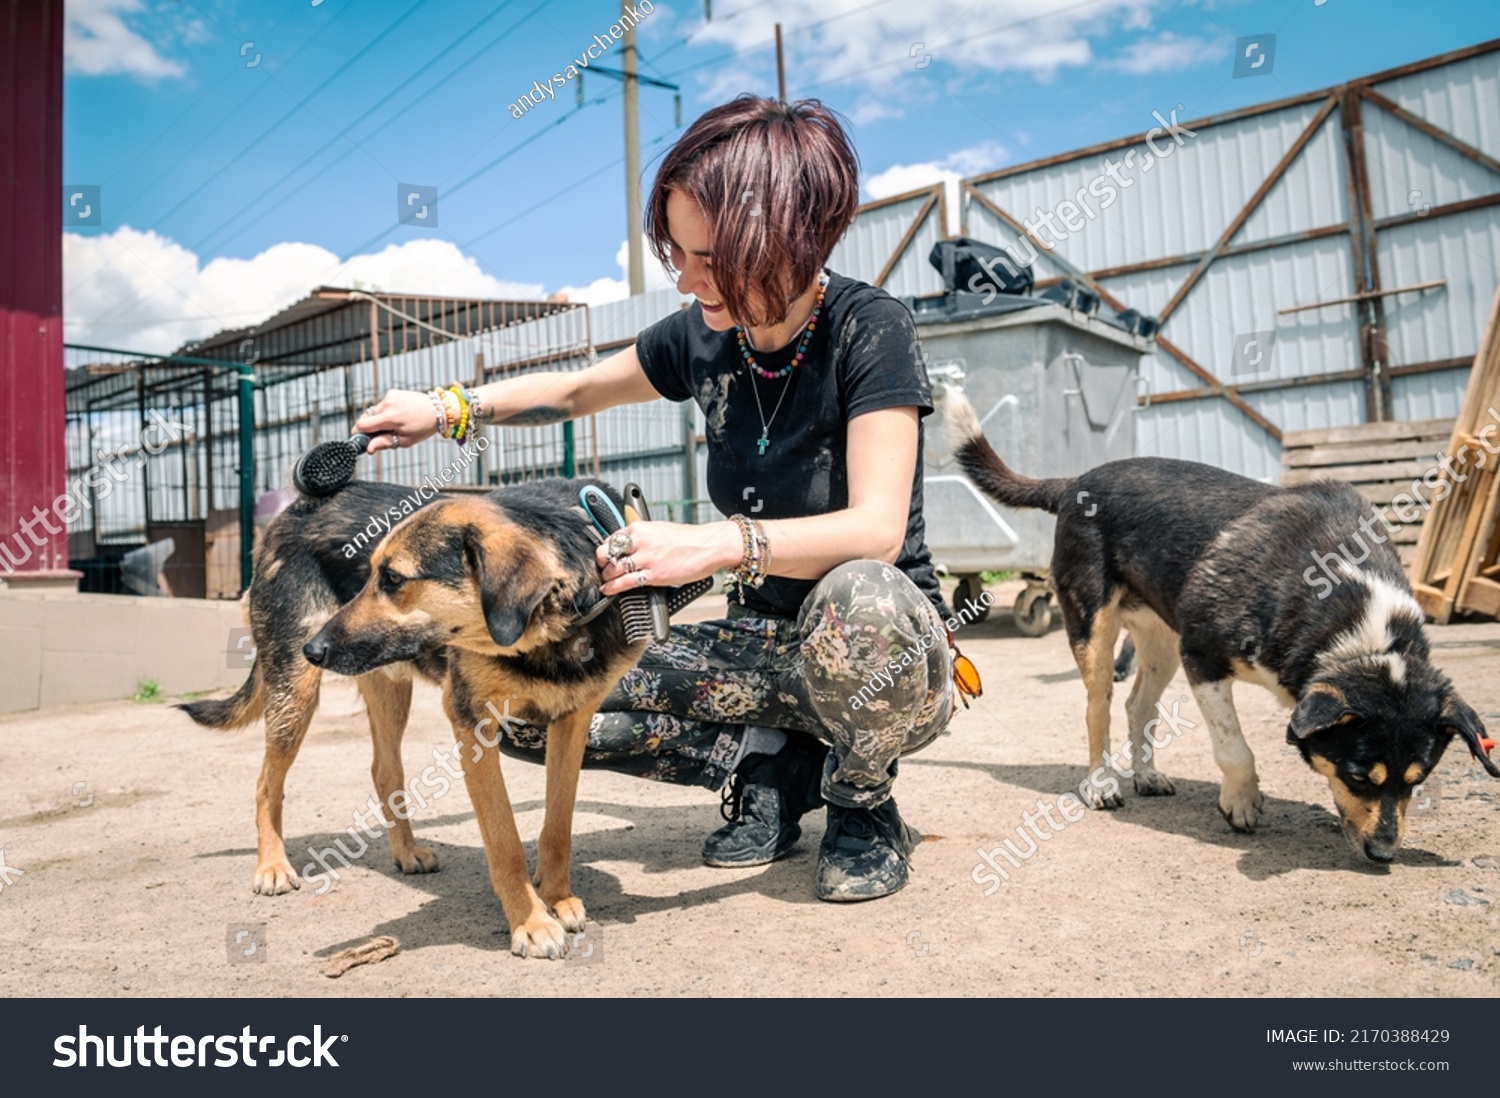 Dog at the shelter. Animal shelter volunteer feeding the dogs. Lonely dogs in cage with cheerful woman volunteer #2170388429